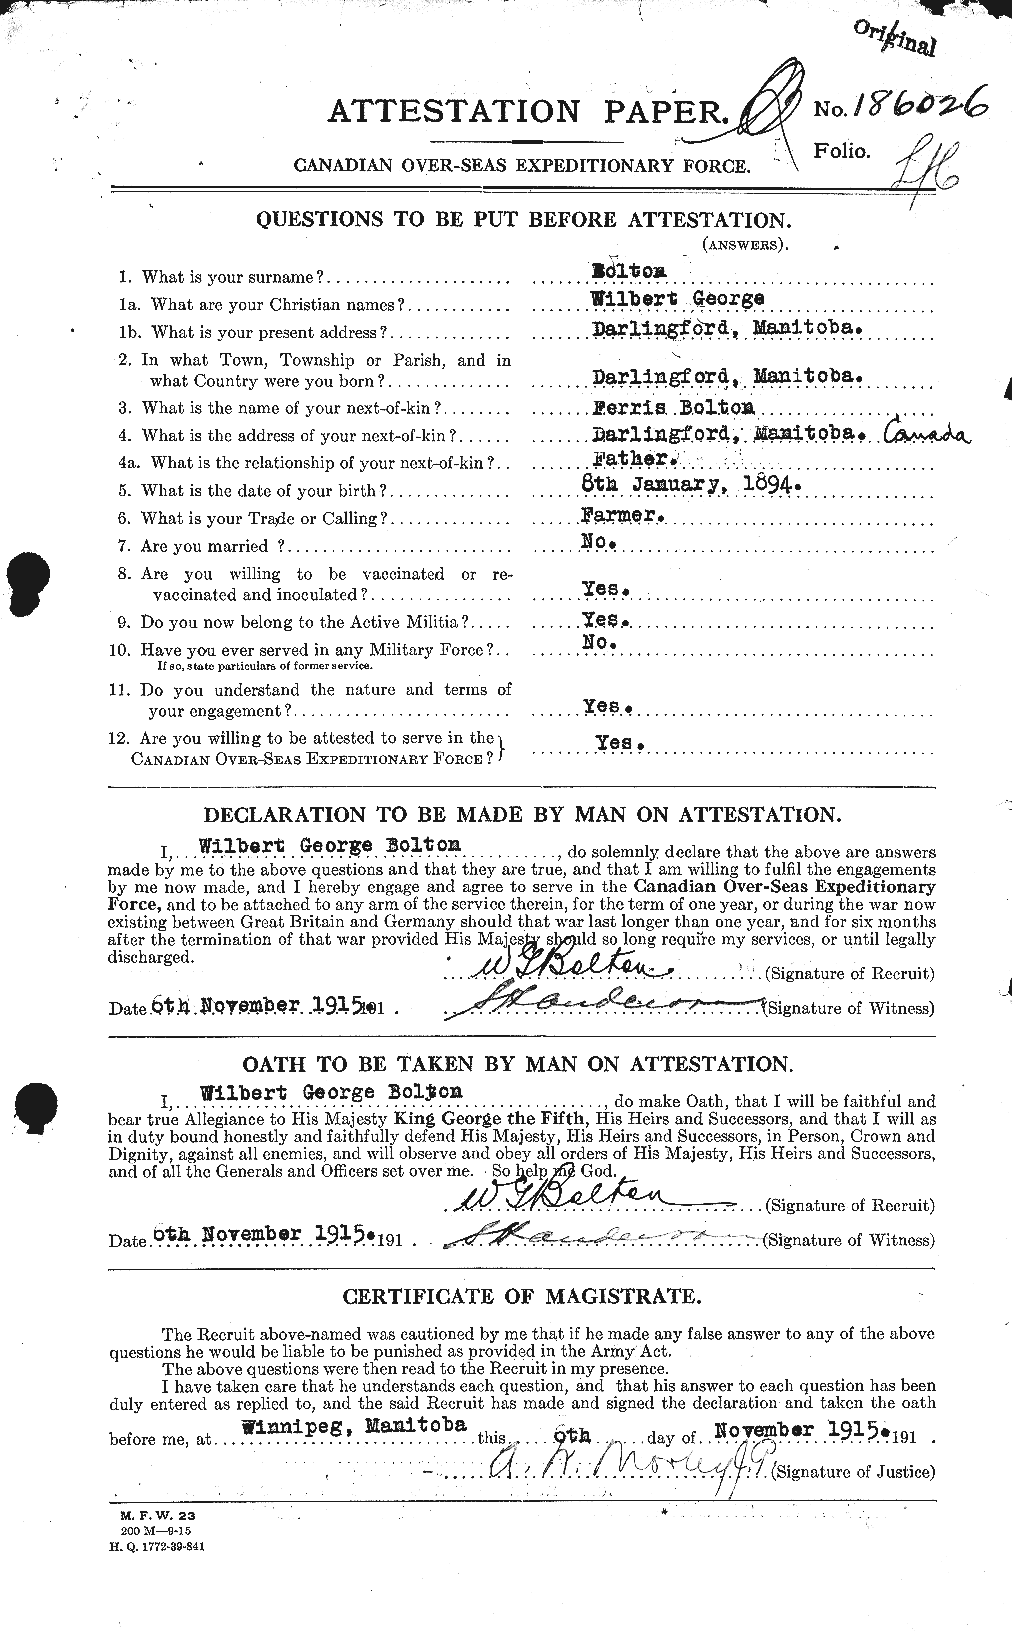 Personnel Records of the First World War - CEF 250137a